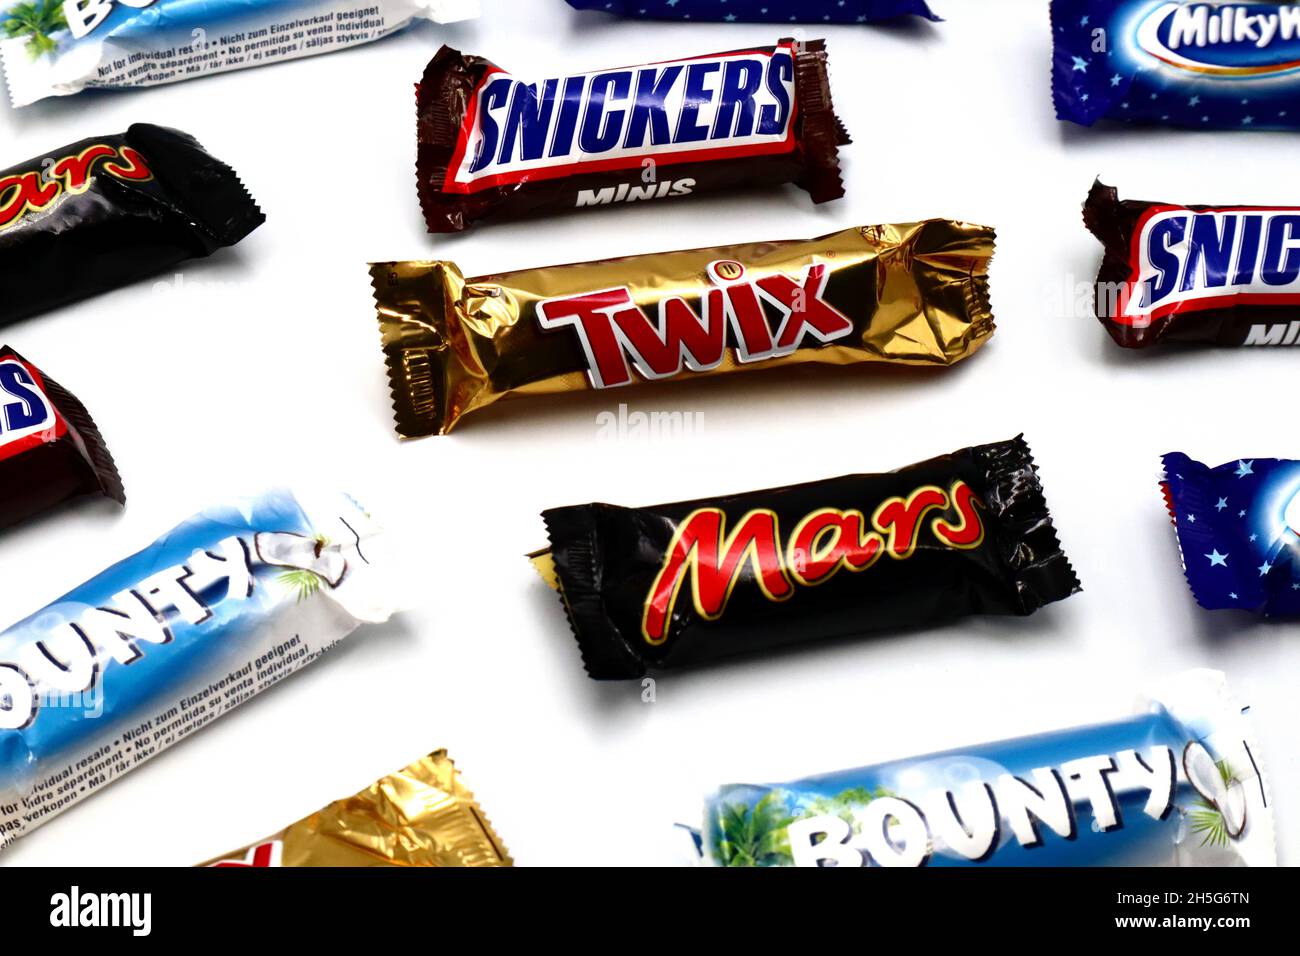 and Way bars, - Mars, Milky Snickers, Bounty, of Twix Alamy chocolate Stock Incorporated Photo brands Mars